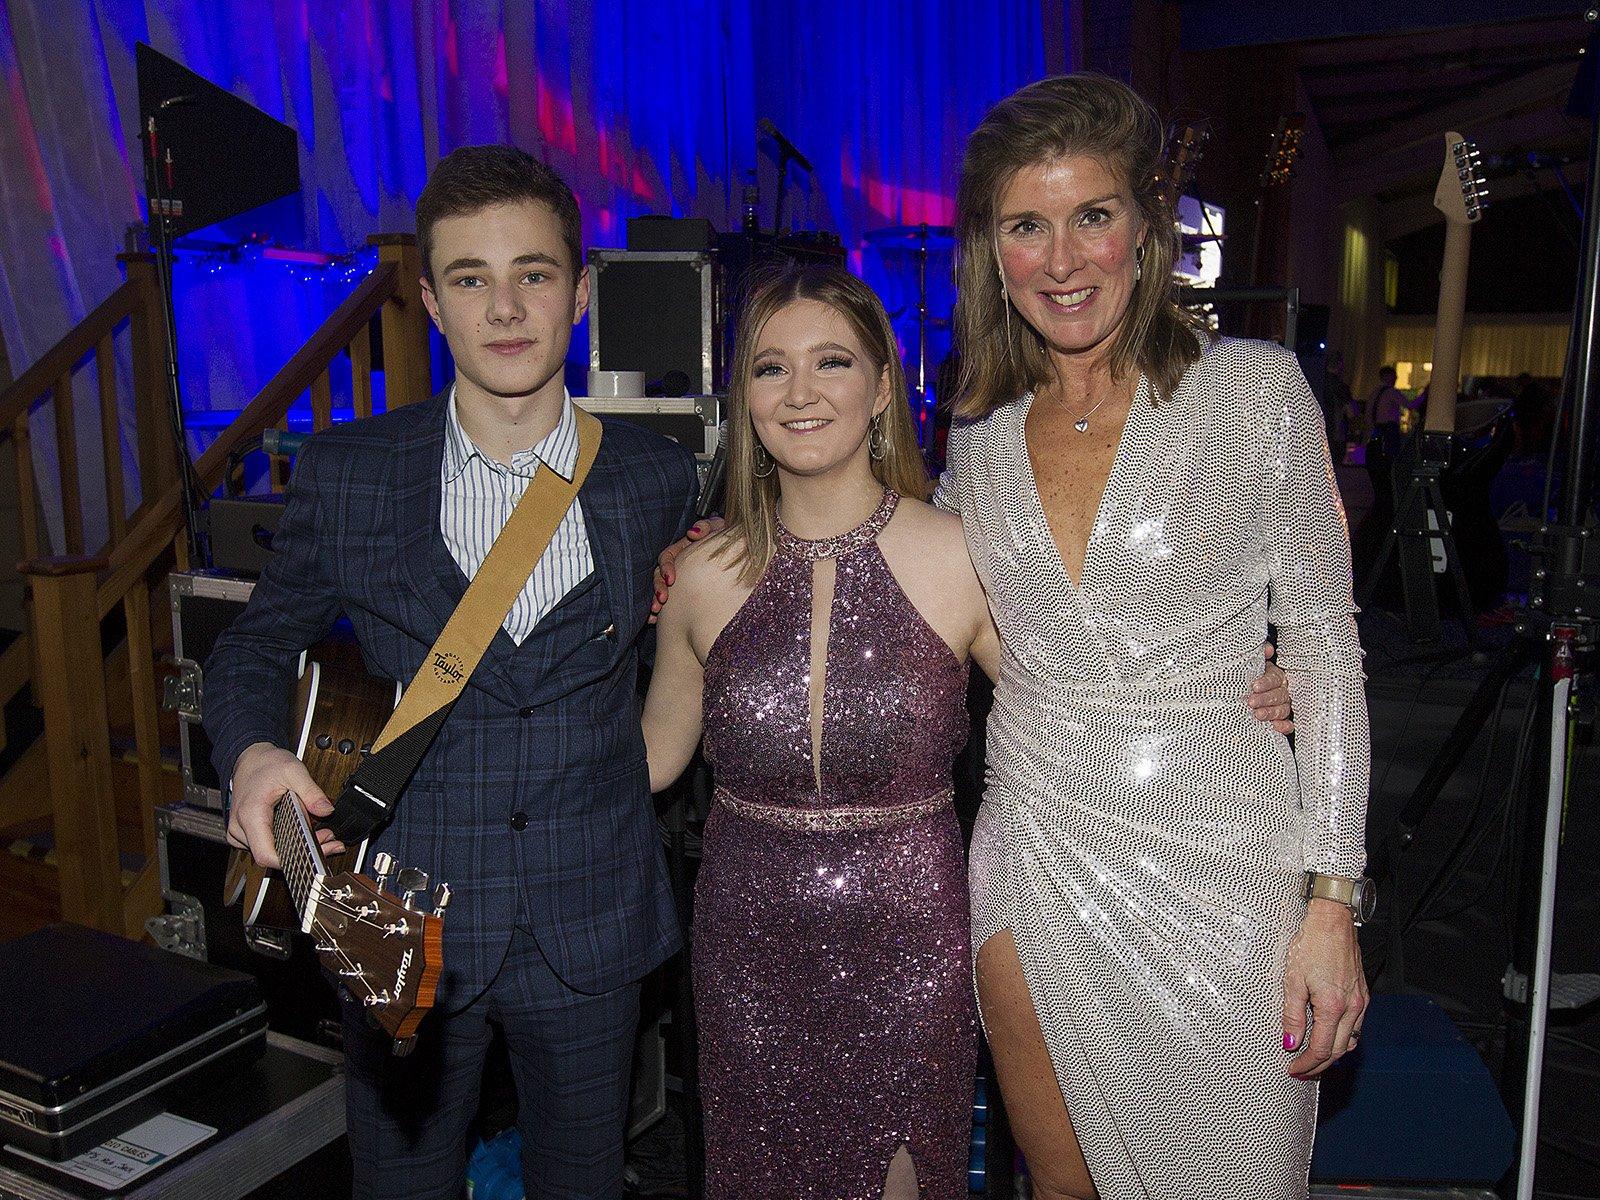 Alex Handyside and Milly Coltherd from Selkirk performed before and during dinner, and they're pictured with Mary Crawford.